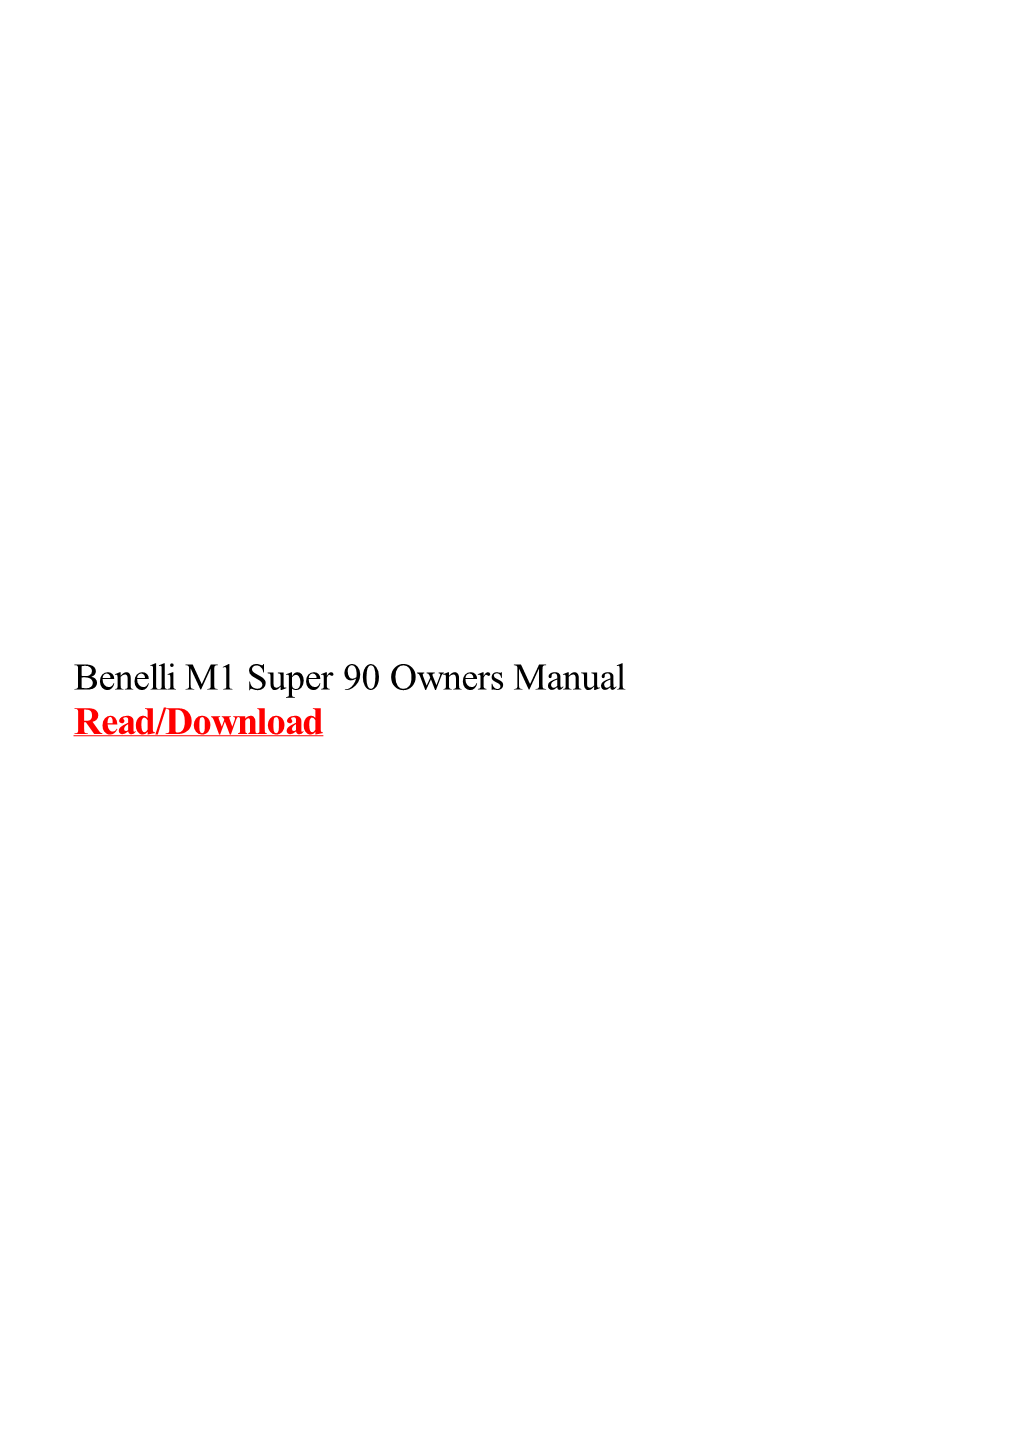 Benelli M1 Super 90 Owners Manual